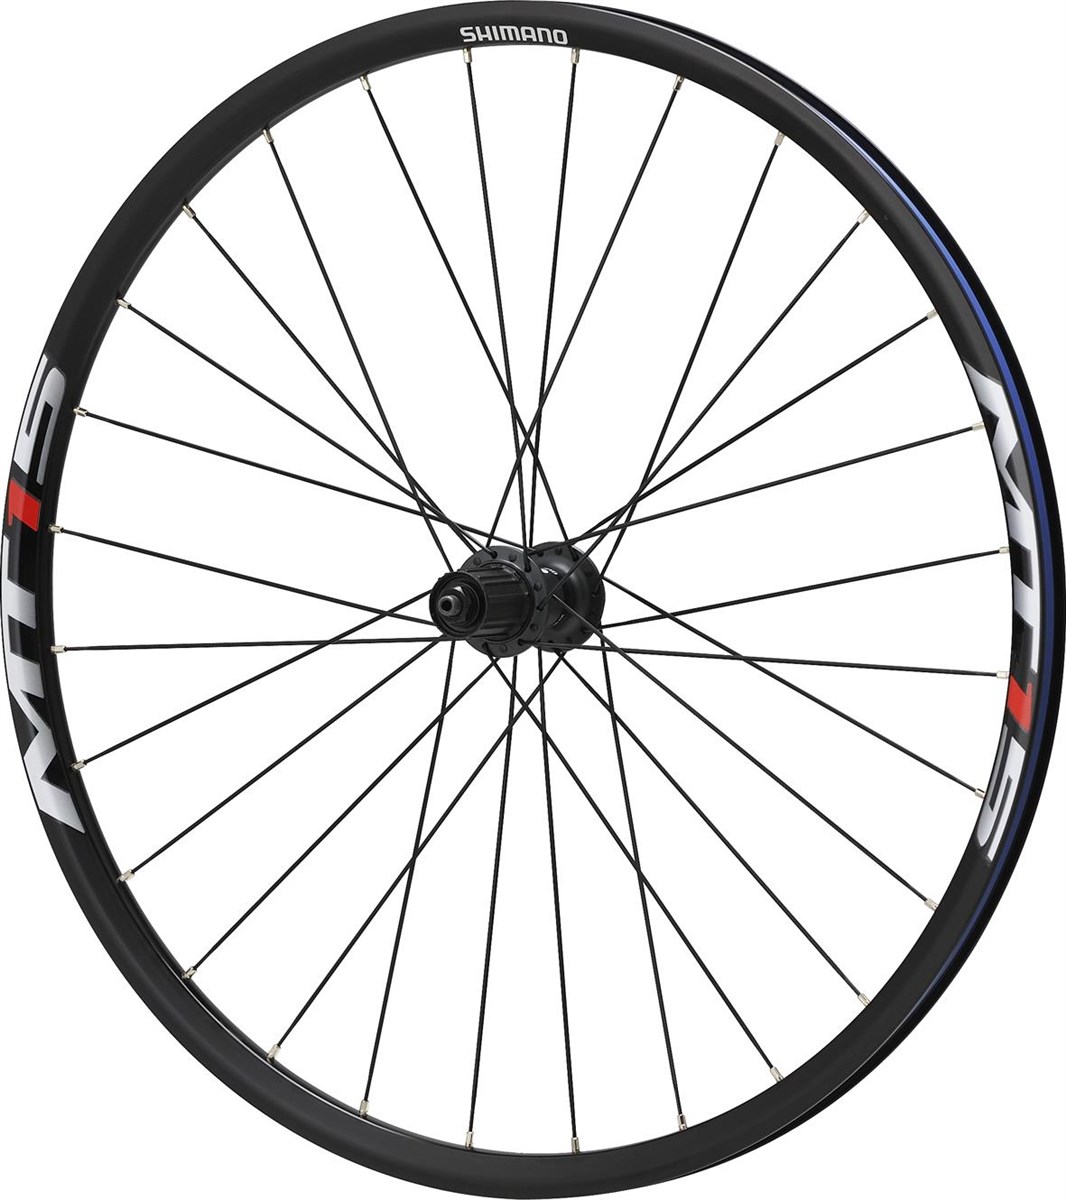 Shimano WH-MT15 XC Wheel, Q / R 135 mm Axle, 27.5in (650B) Clincher, Black, Rear product image